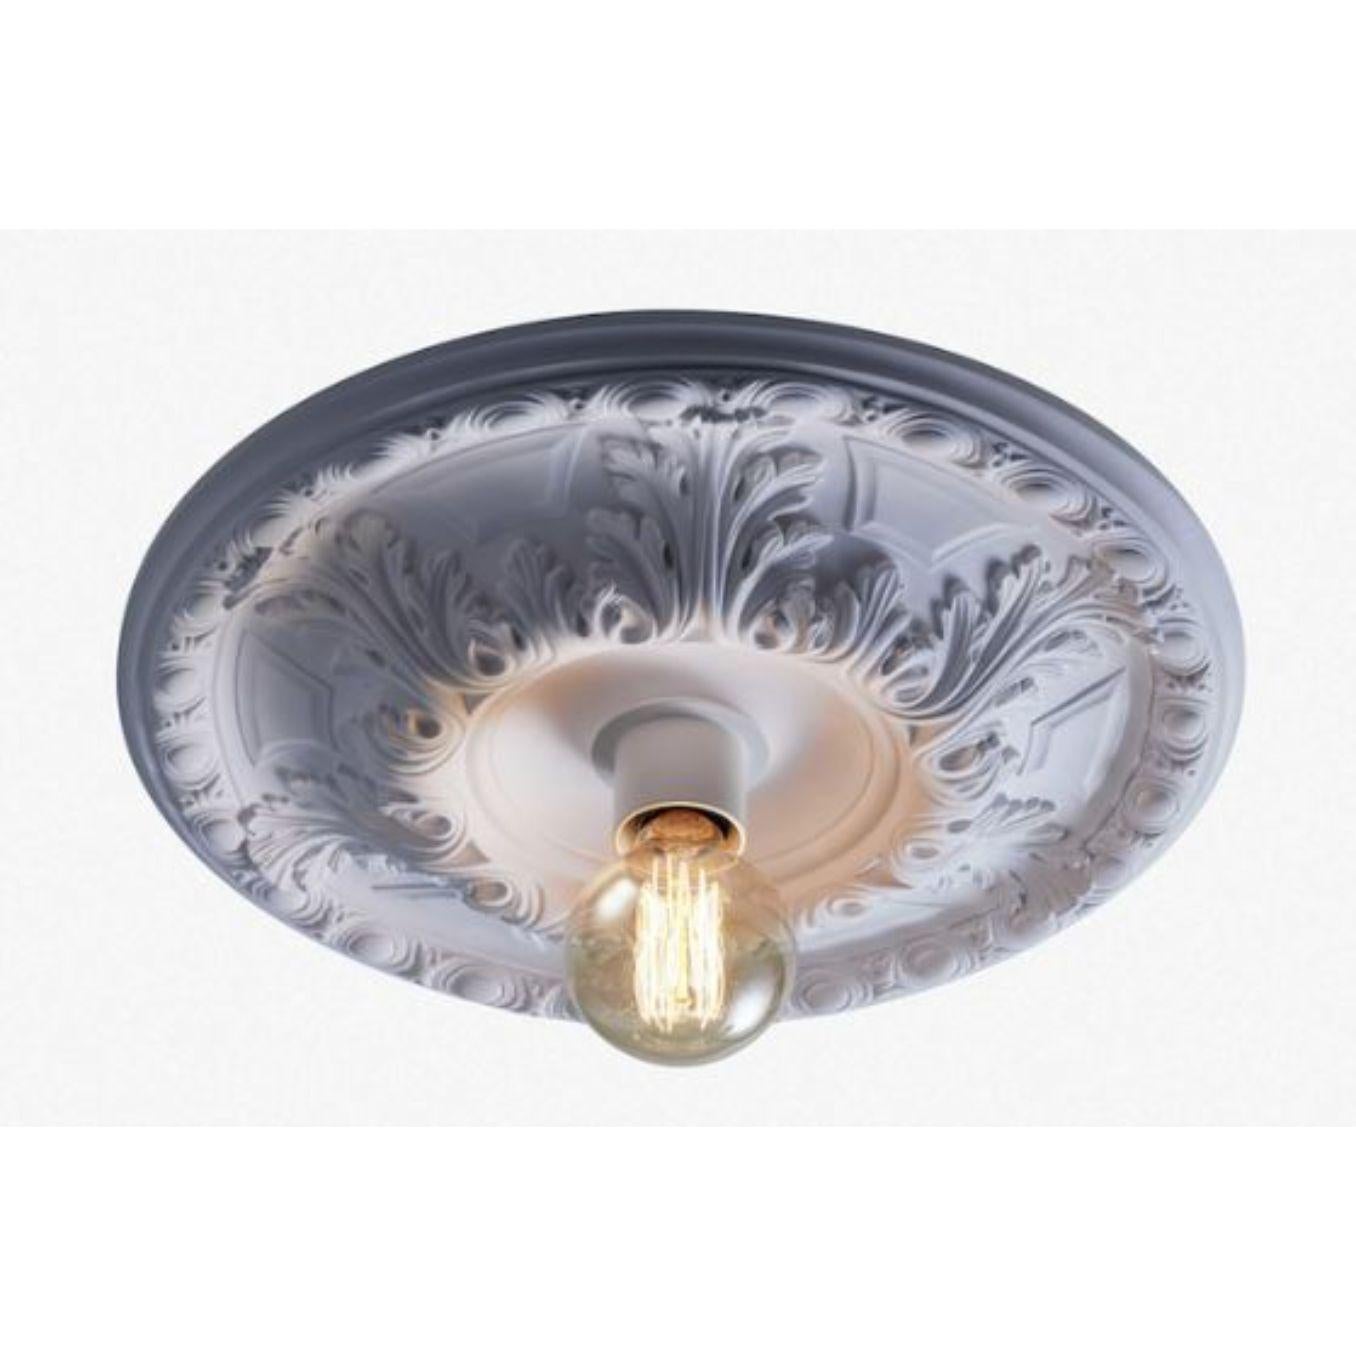 French Small Solferino Ceiling Light by RADAR For Sale